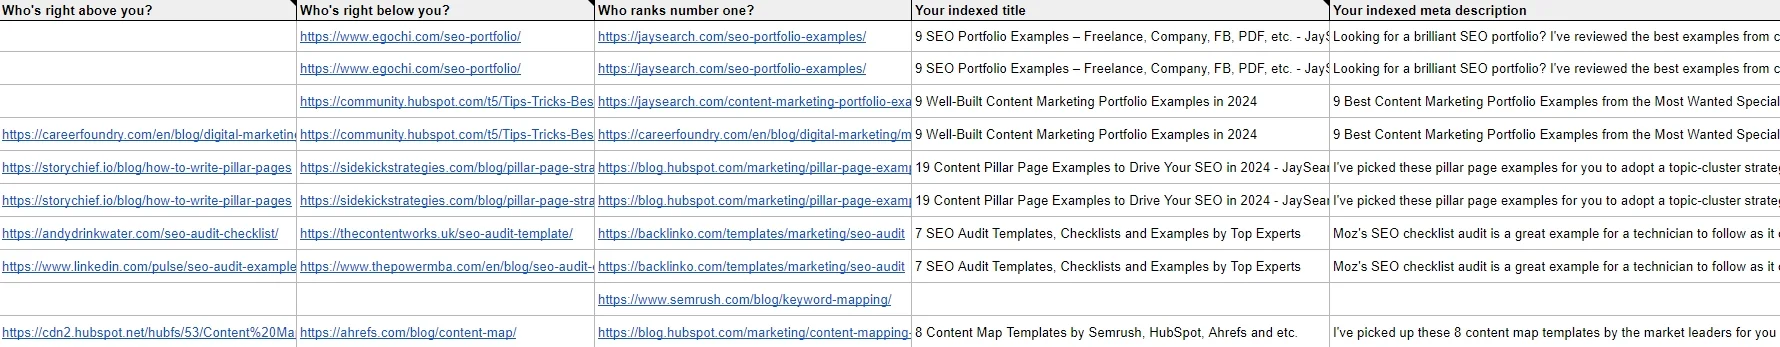 Review the rankings for each keyword